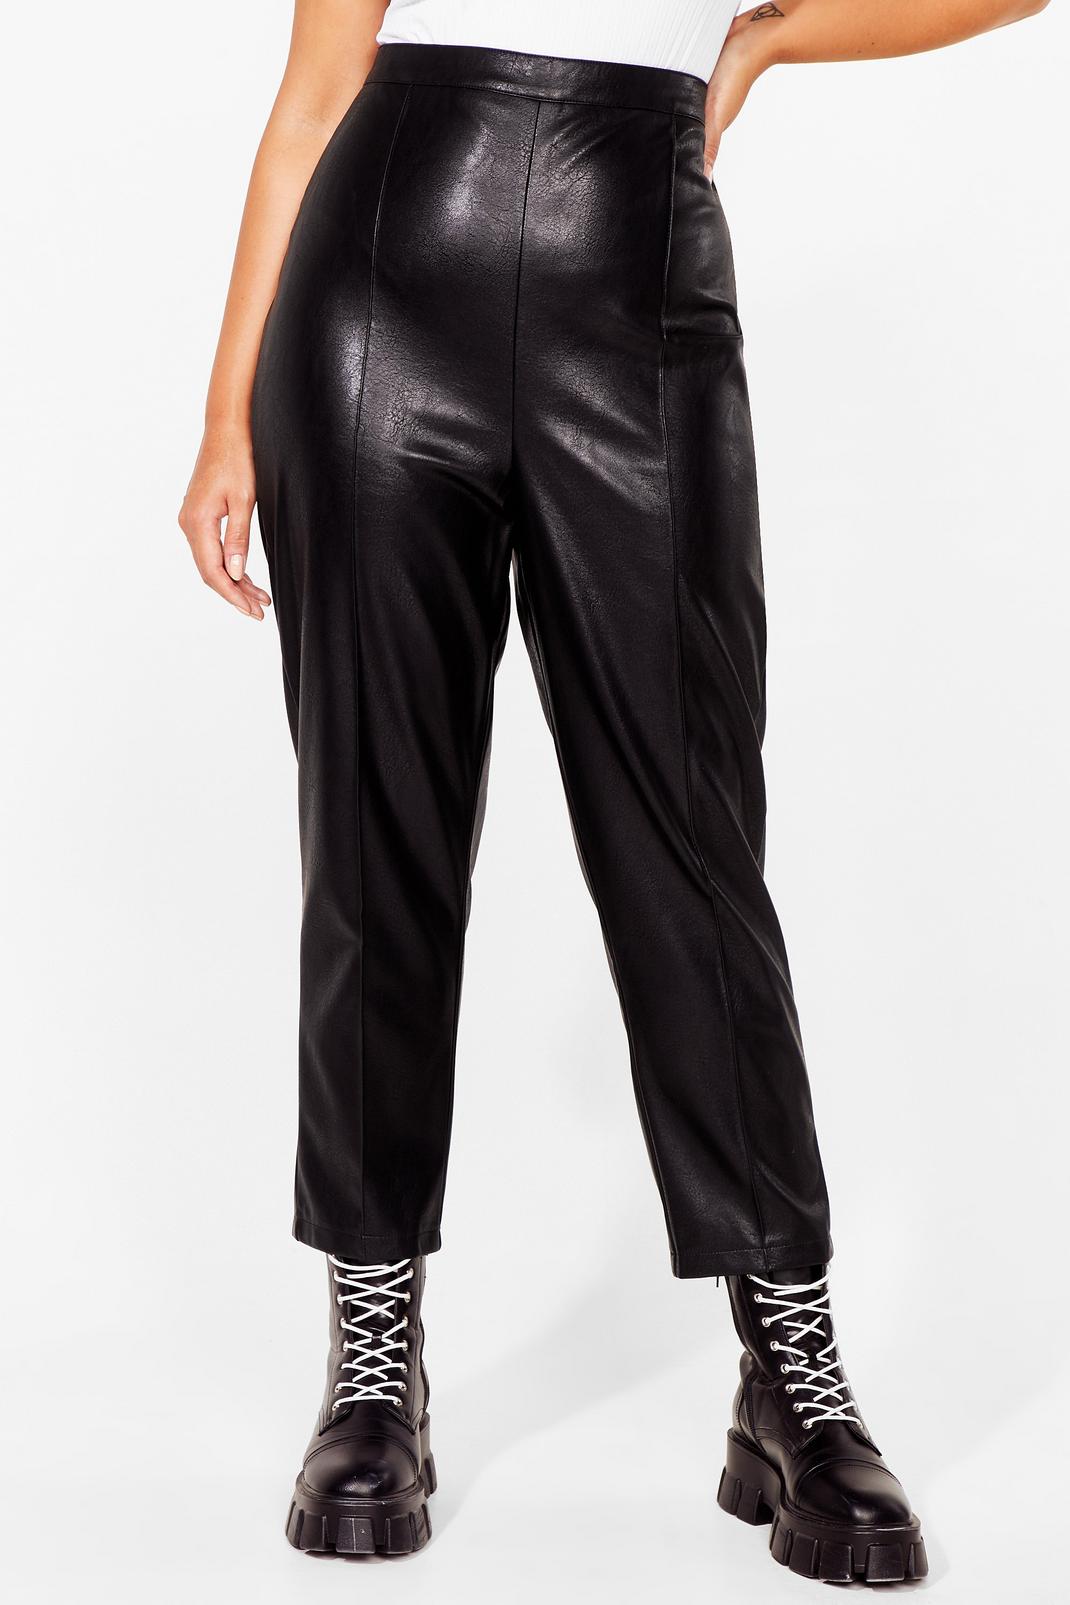 Plus Size Faux Leather Tapered Pants | Nasty Gal